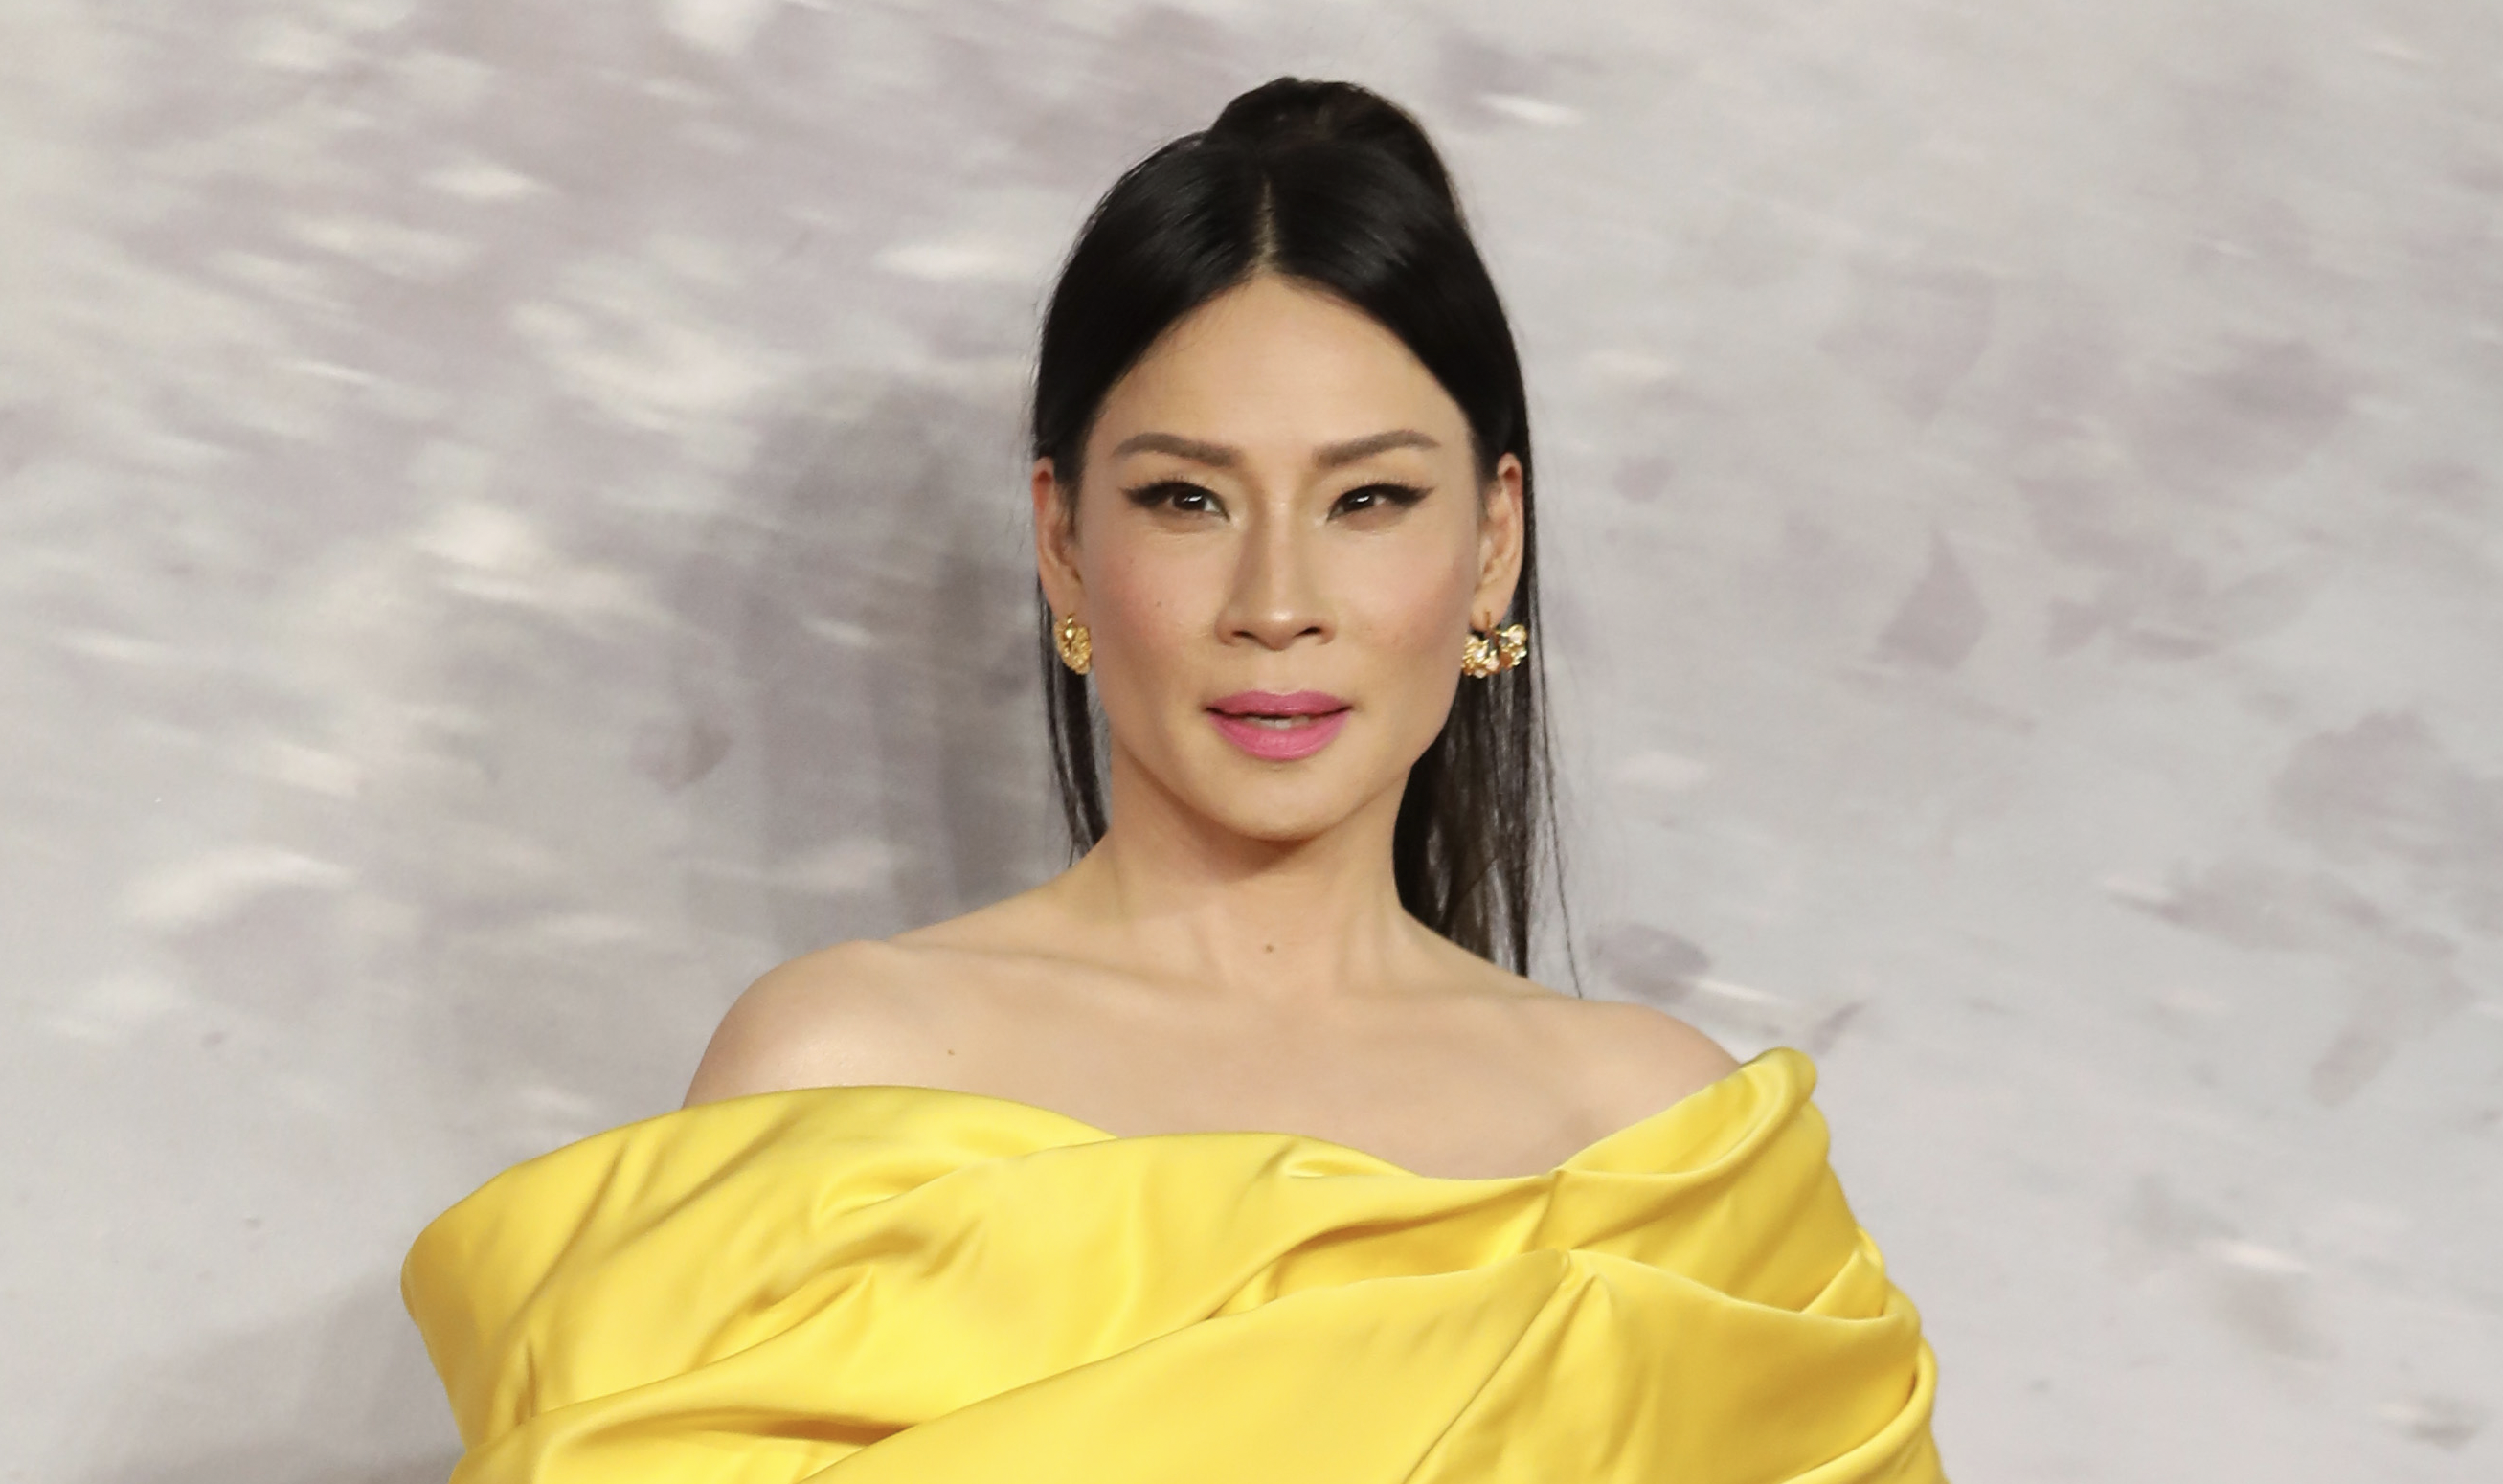 Lucy Liu on Why She Spent Five Years Bringing ‘Rosemead’ to the Big Screen: ‘Even if One Person Sees It, That’s...